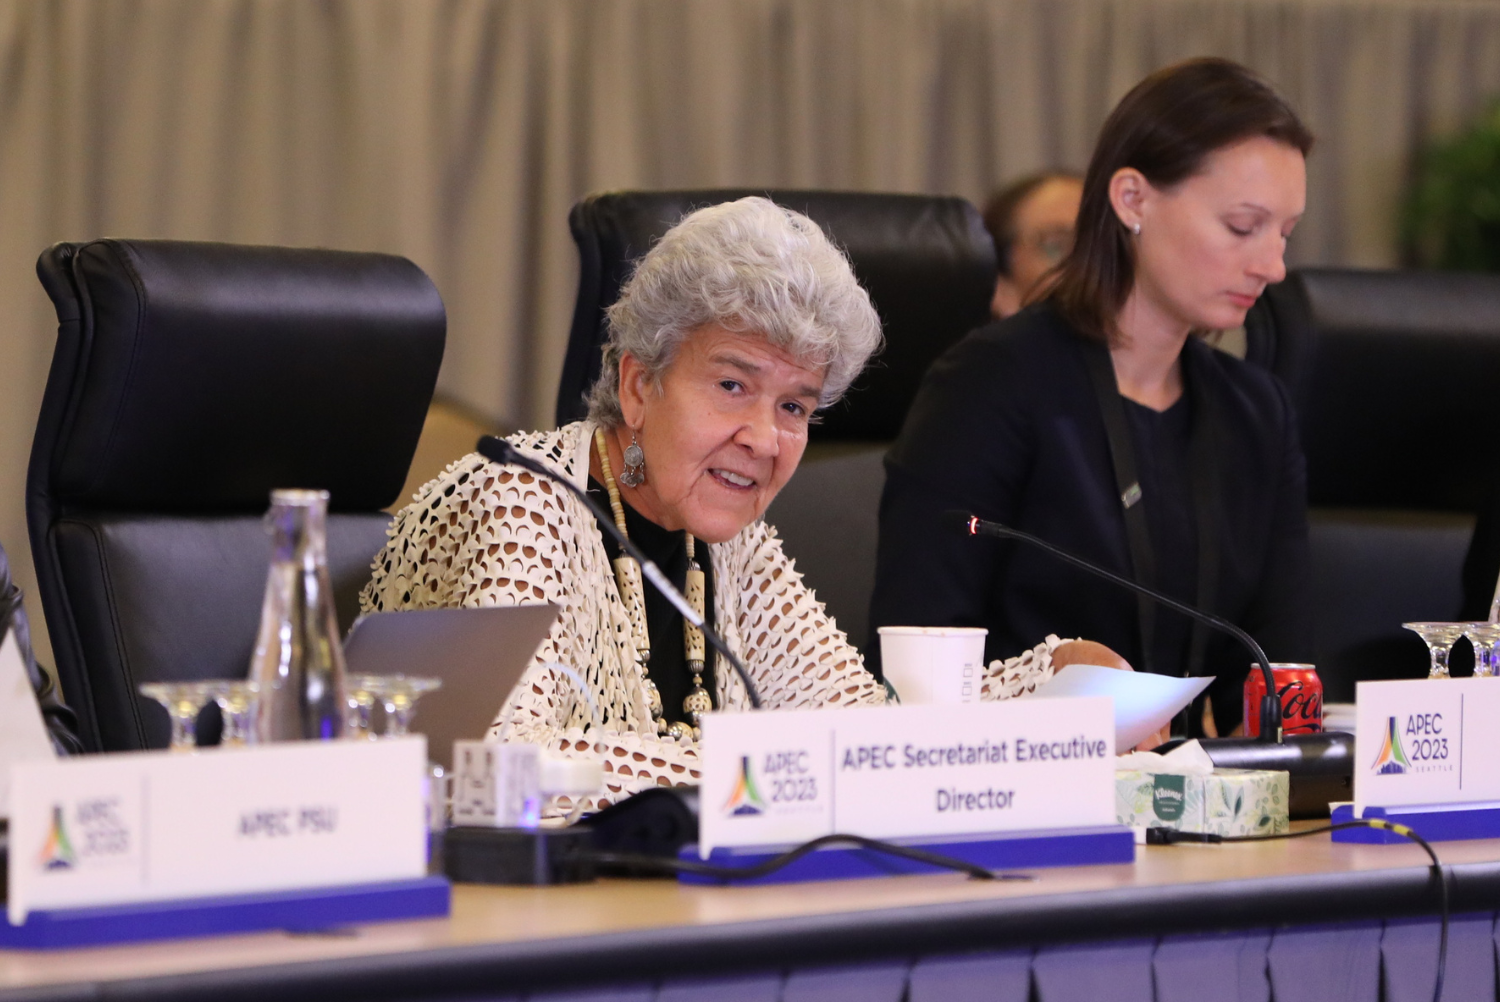 APEC Pledges Greater Support for Small Businesses